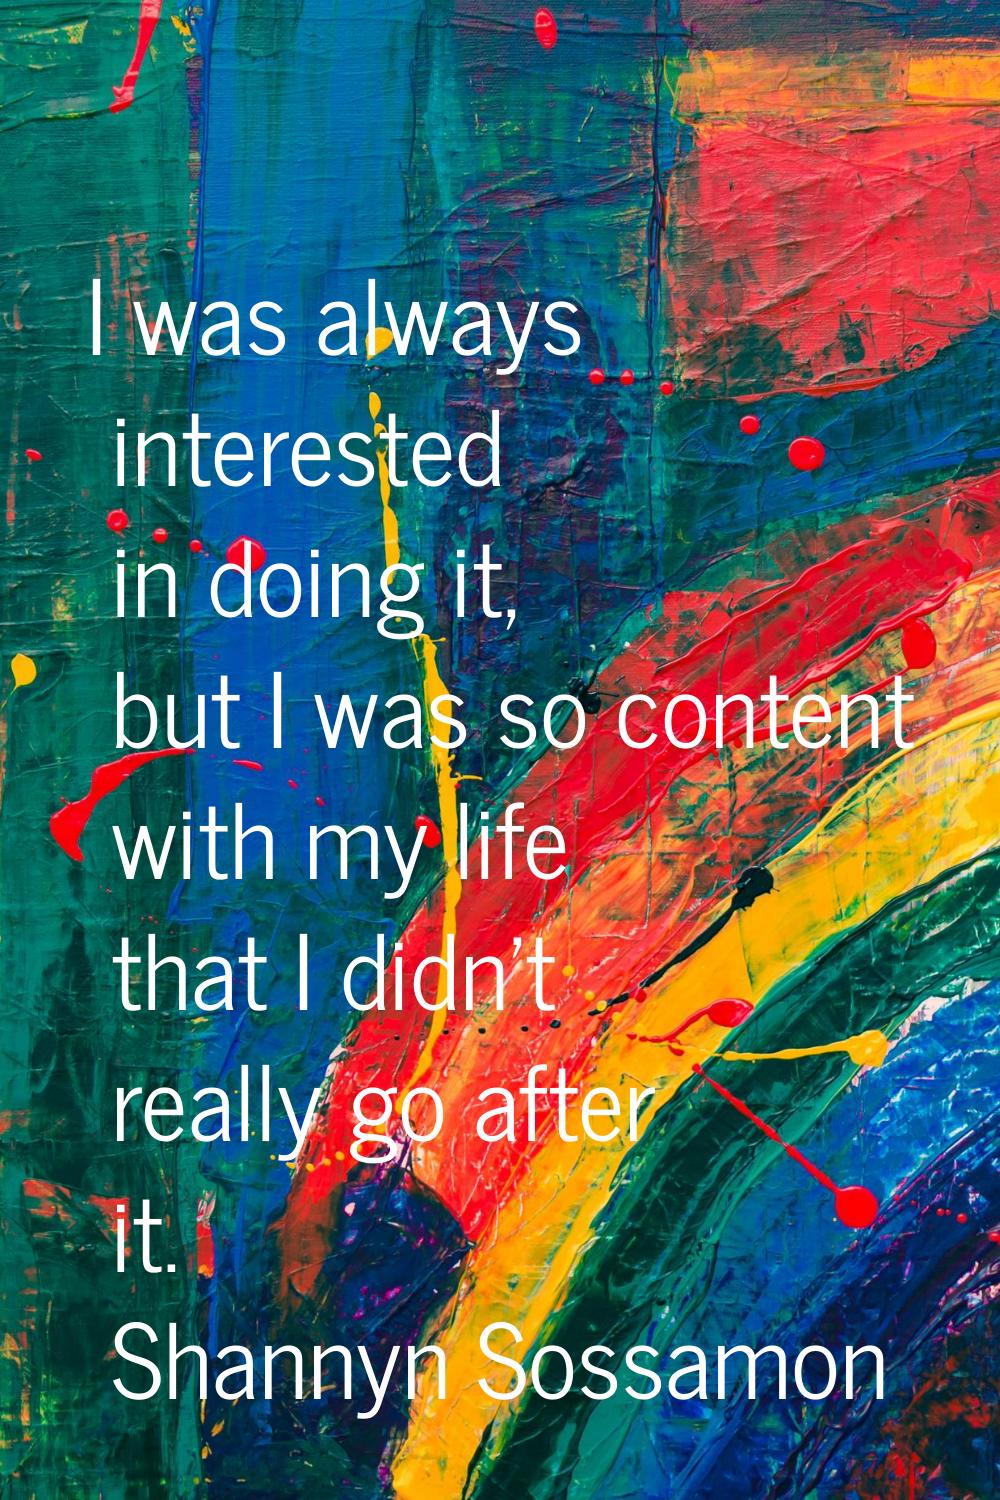 I was always interested in doing it, but I was so content with my life that I didn't really go afte